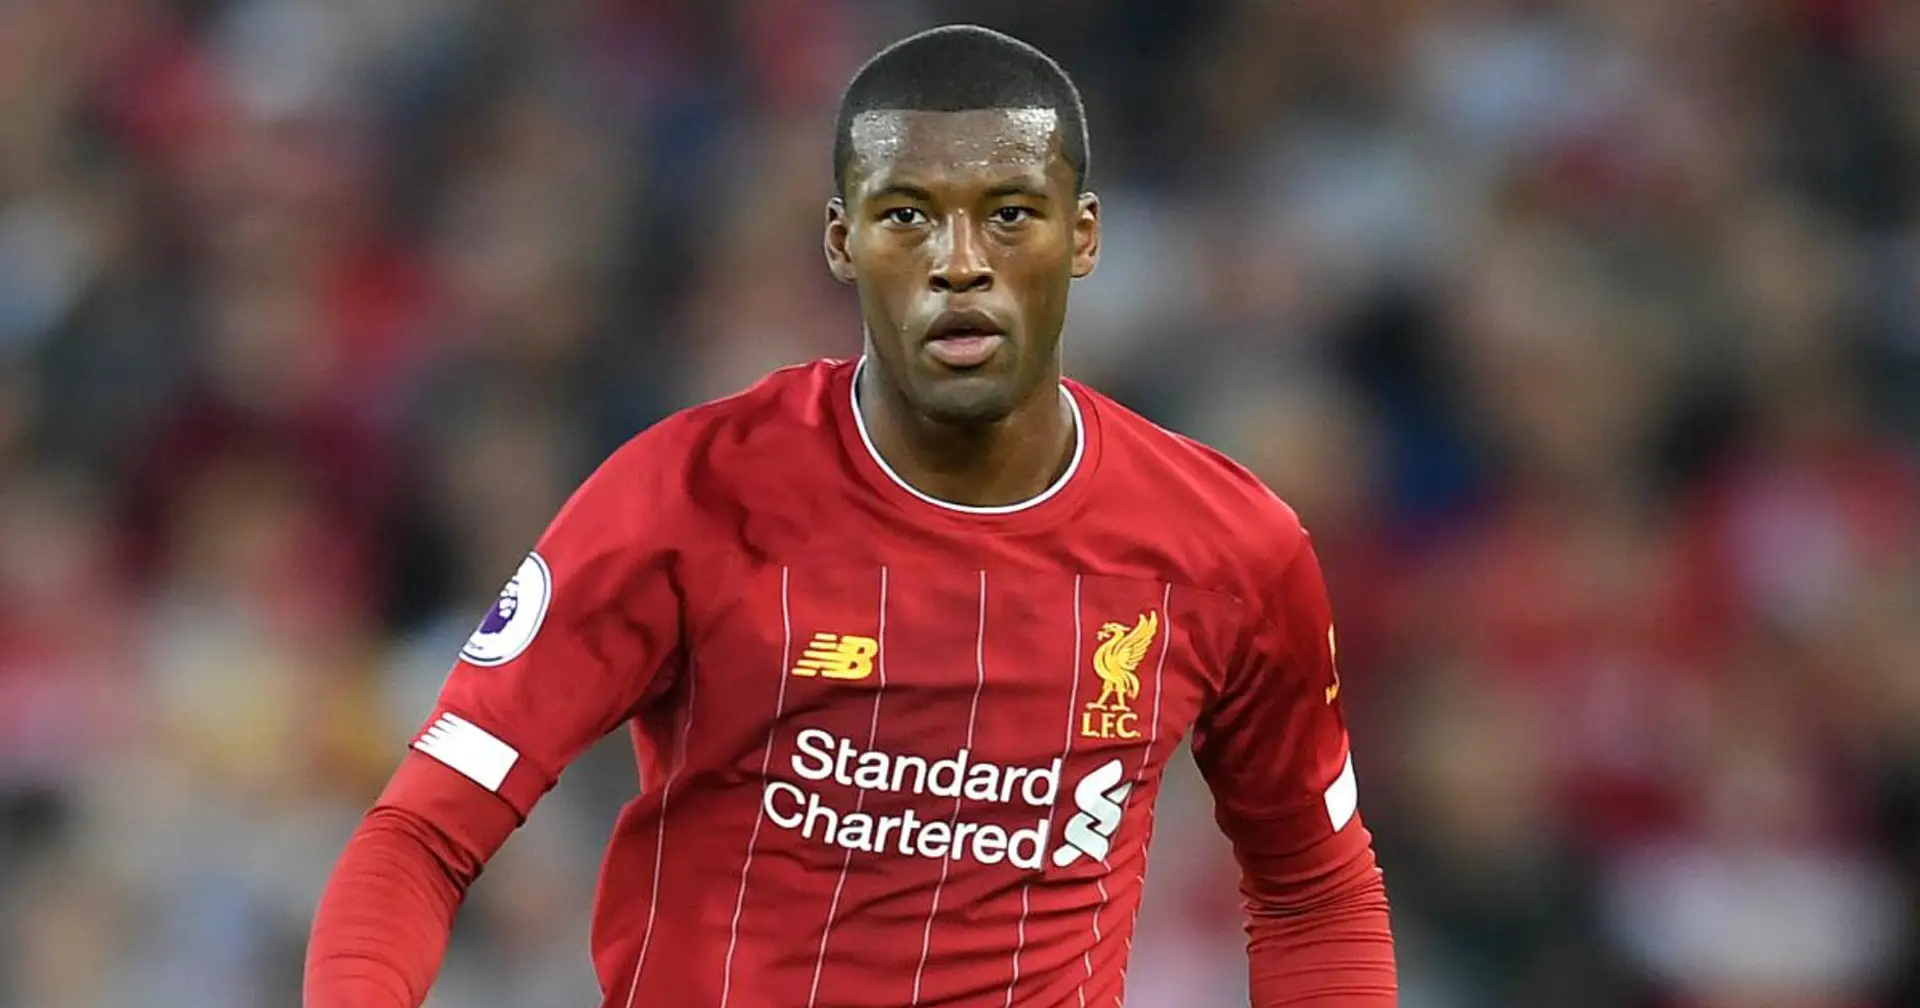 Why Liverpool's Georginio Wijnaldum changed his name early in his career